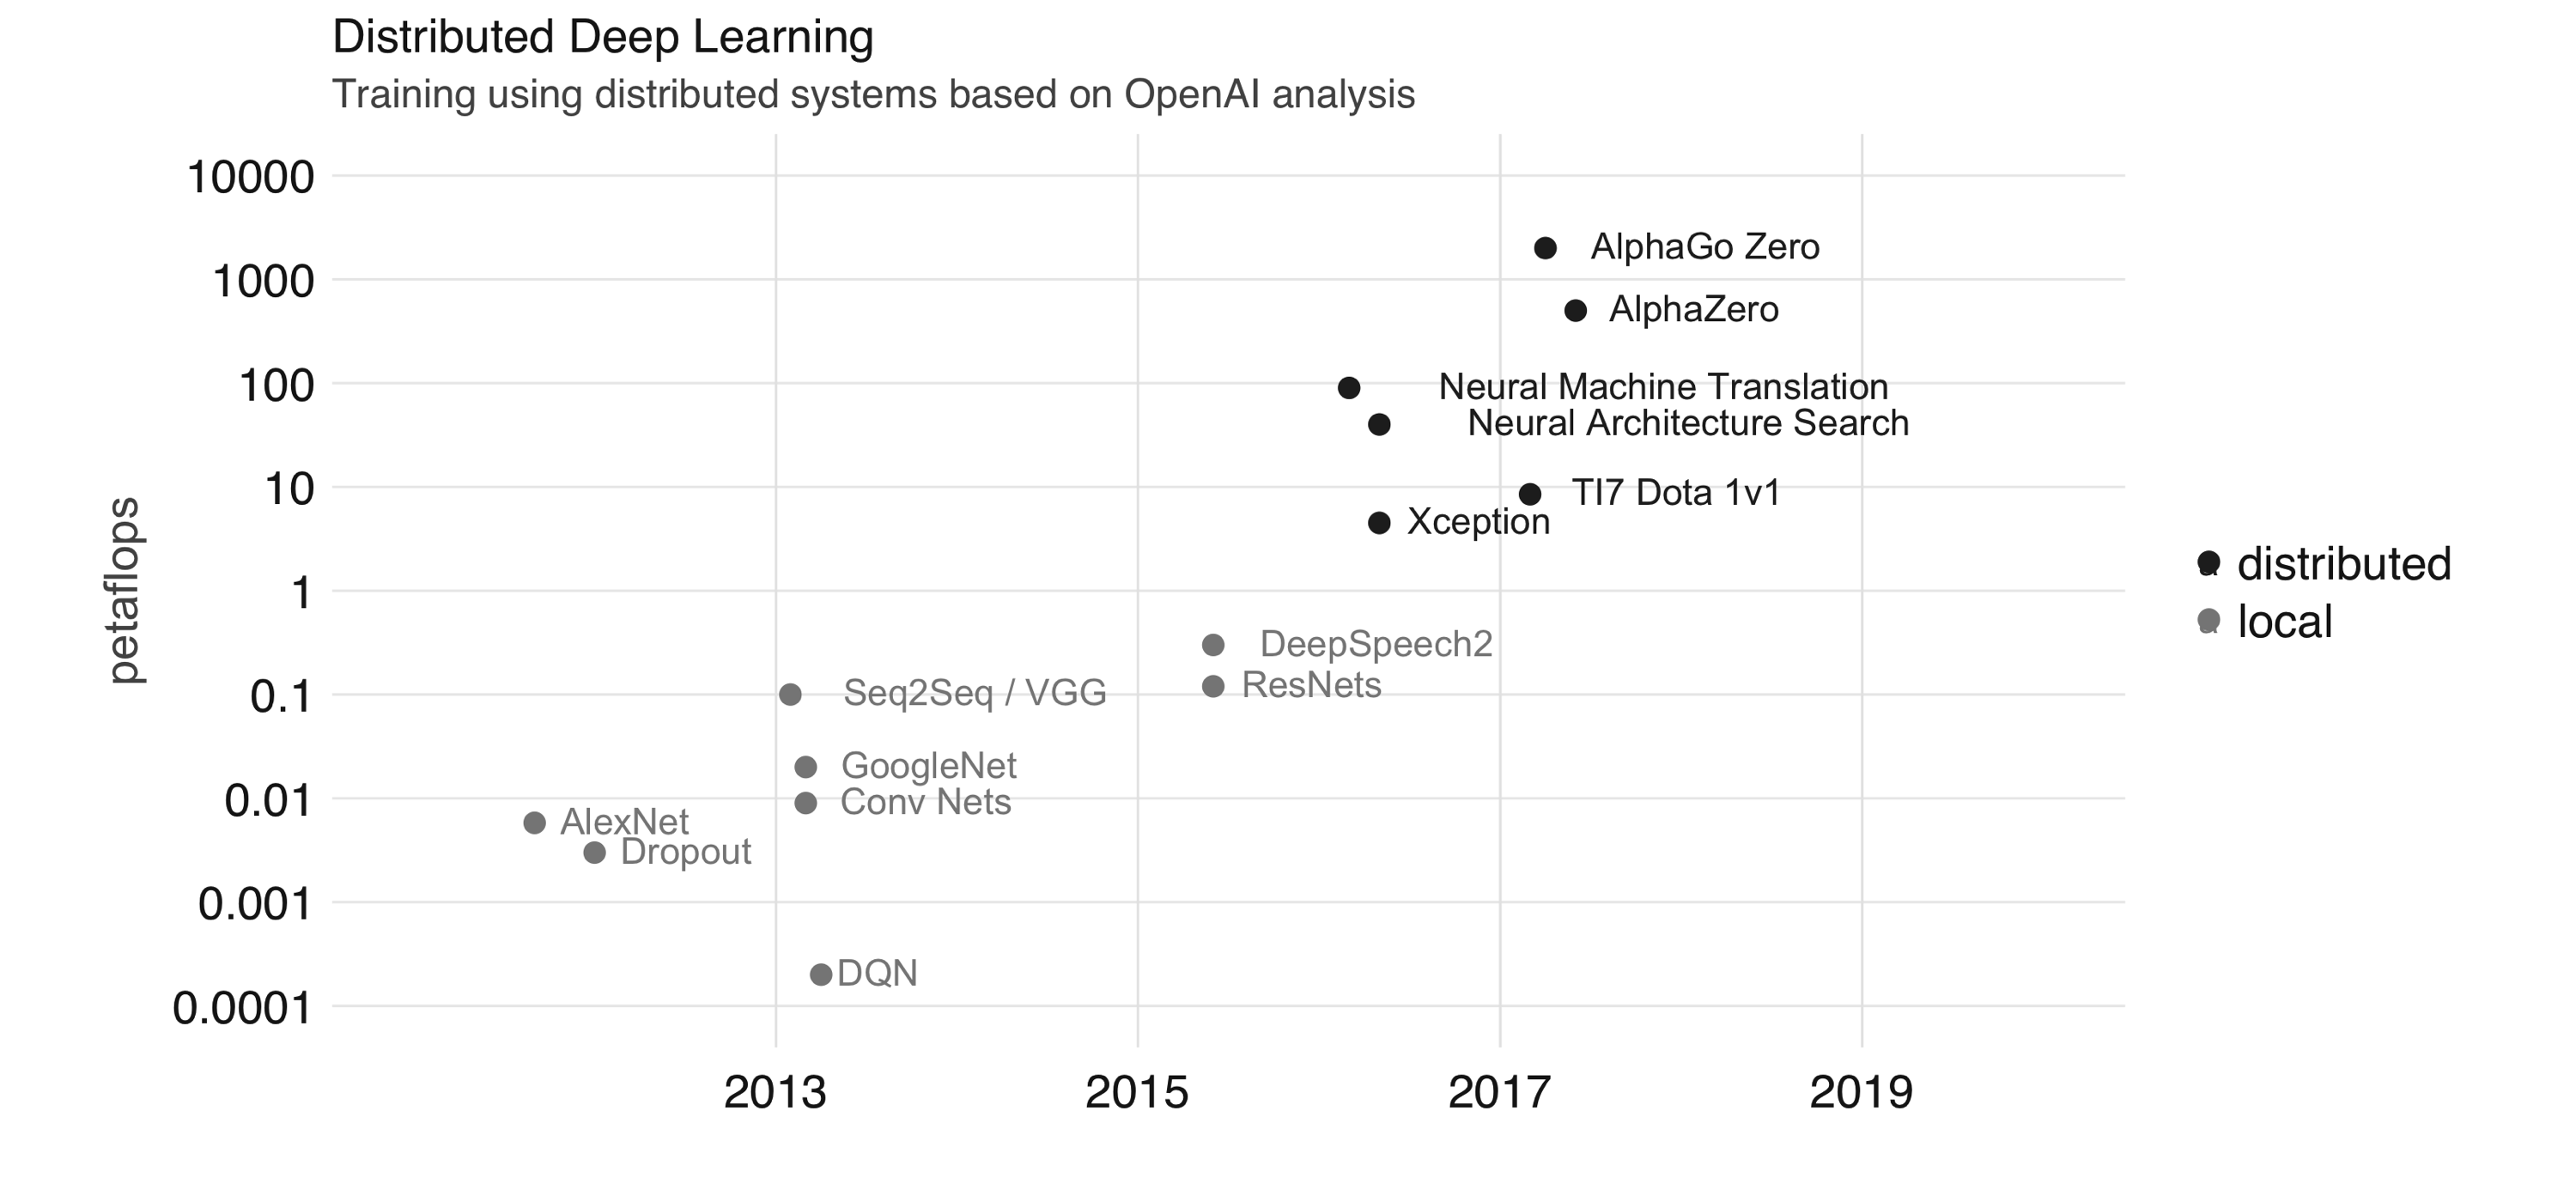 Training using distributed systems based on OpenAI analysis